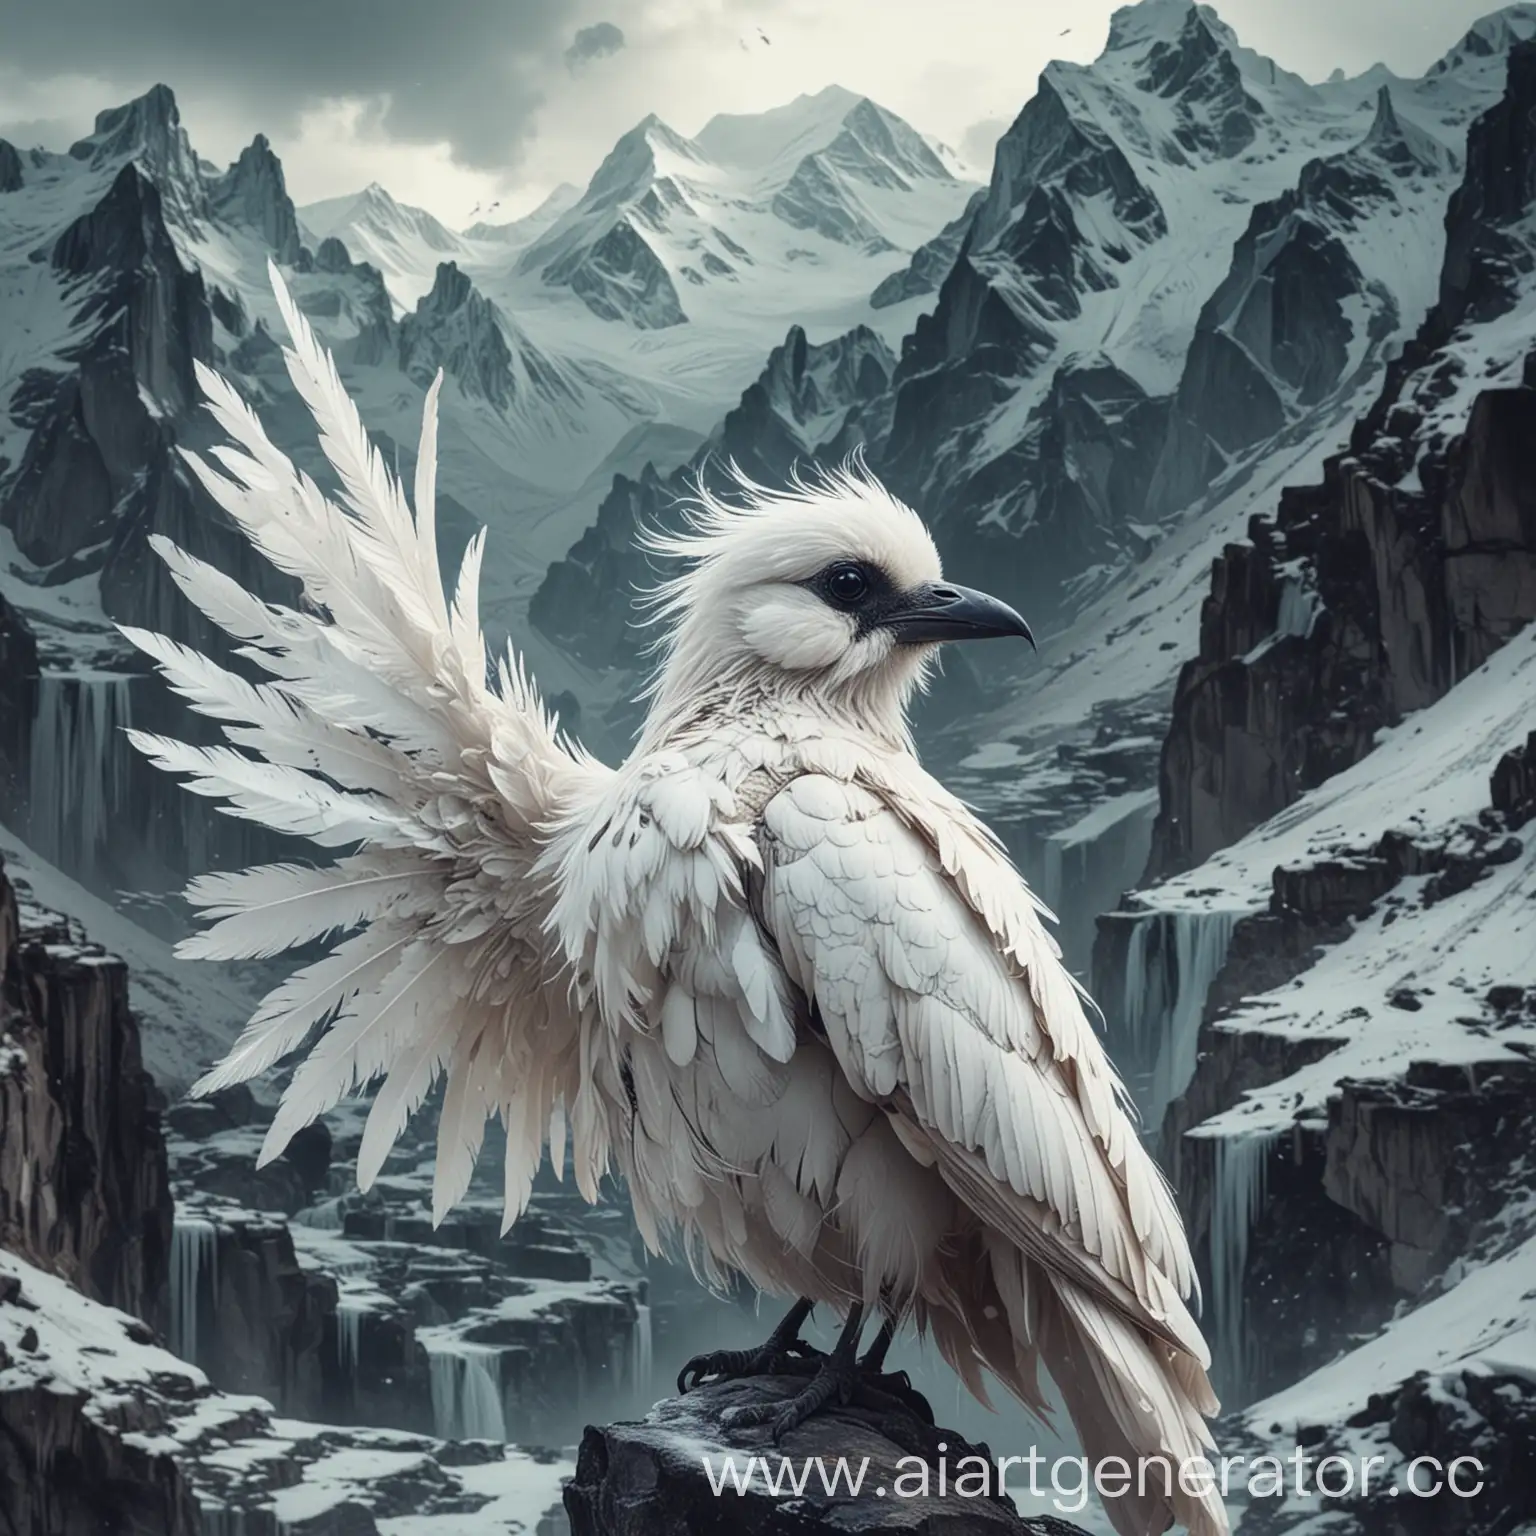 Opium-Bird-with-White-Feathers-in-Glitchy-Icy-Mountain-Landscape